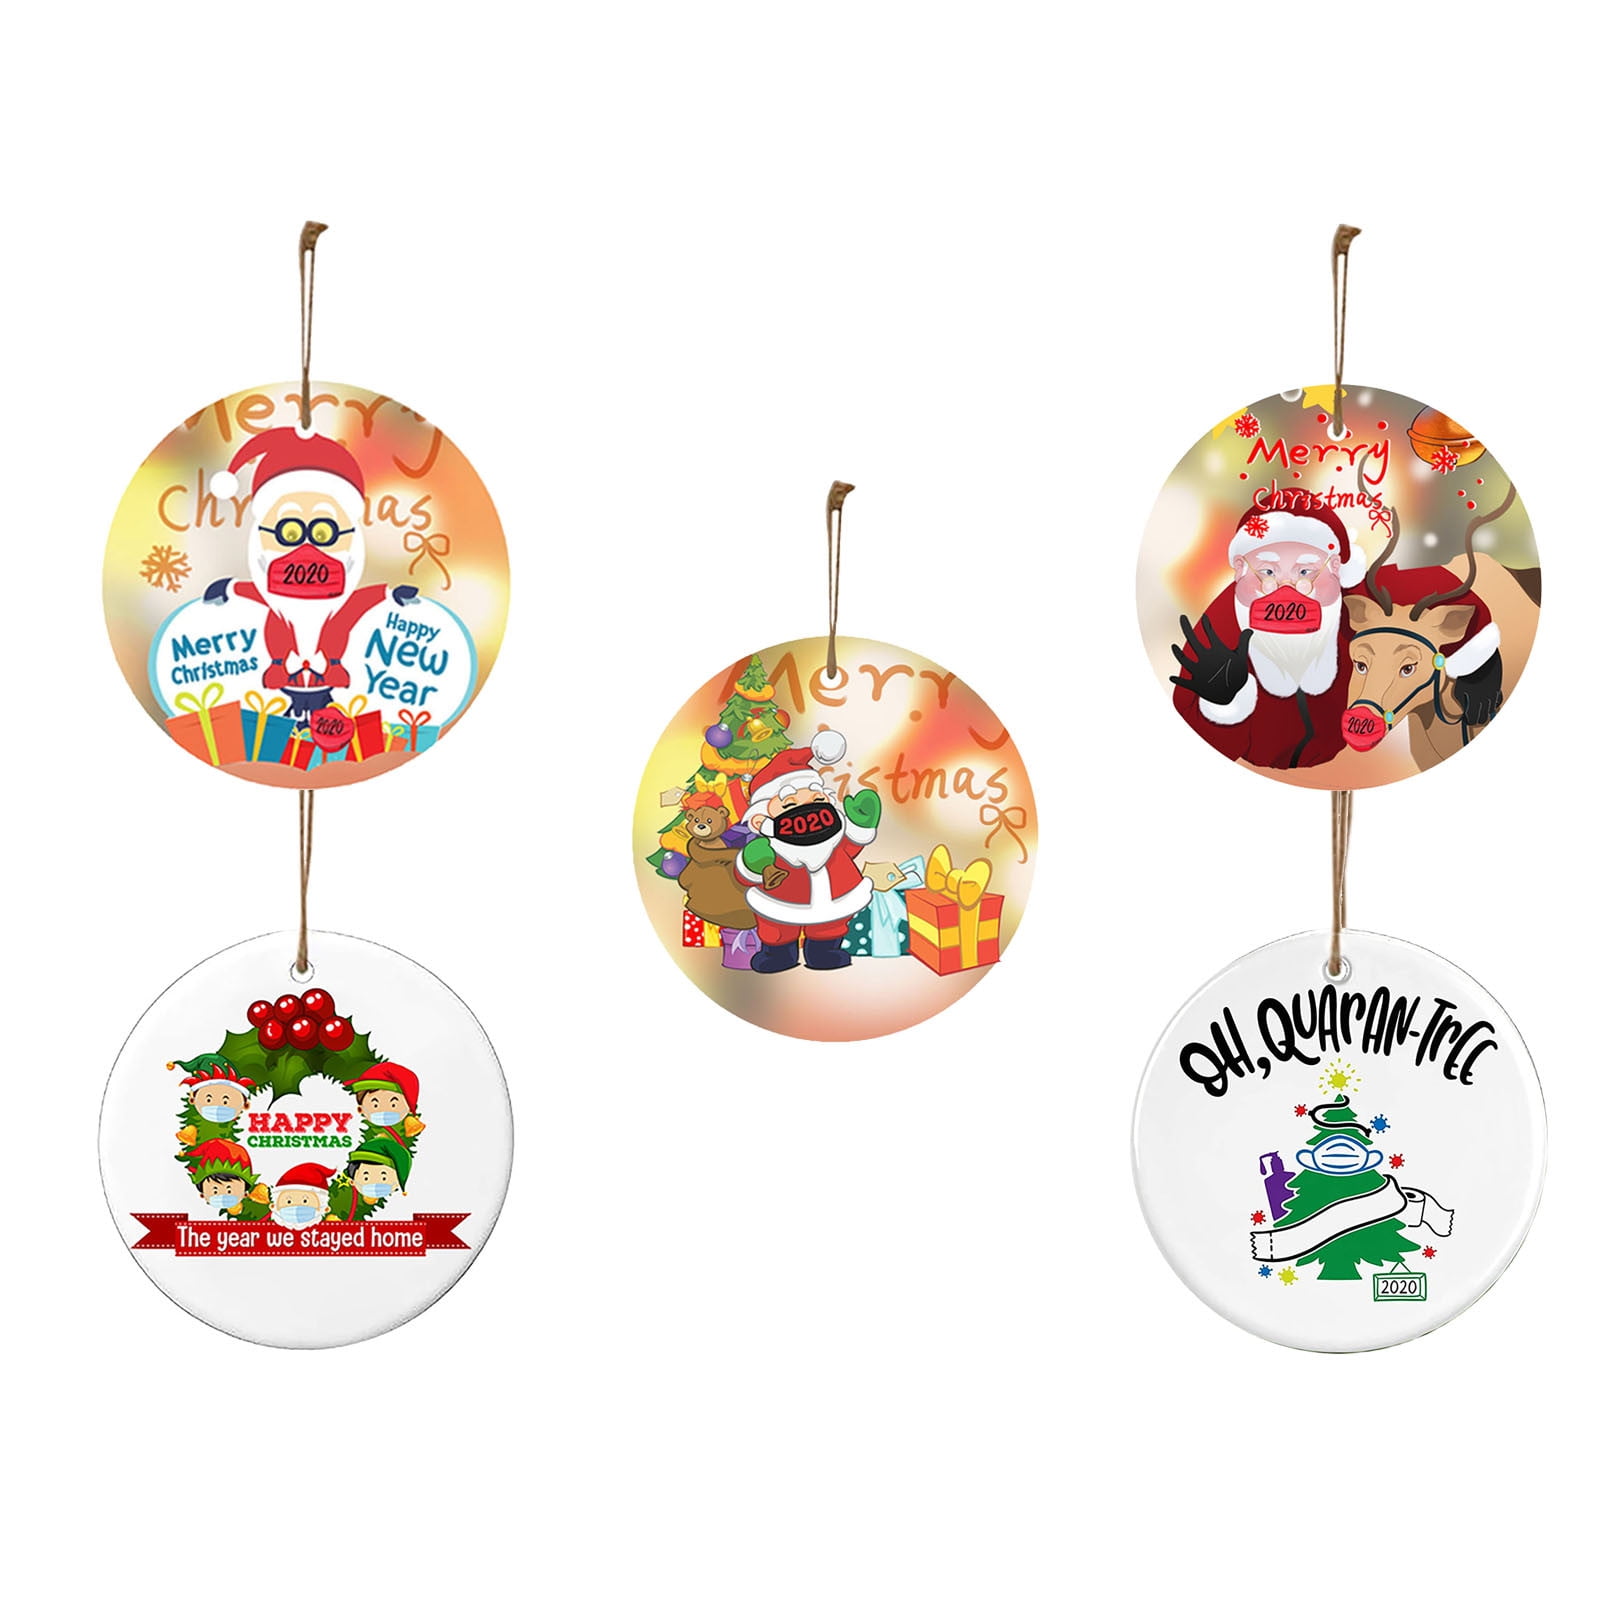 2020 Christmas Ornaments,Friends New Year Gift Holiday Decor Santa Hat Xmas Tree Decorations Ornament Collected and Commemorative